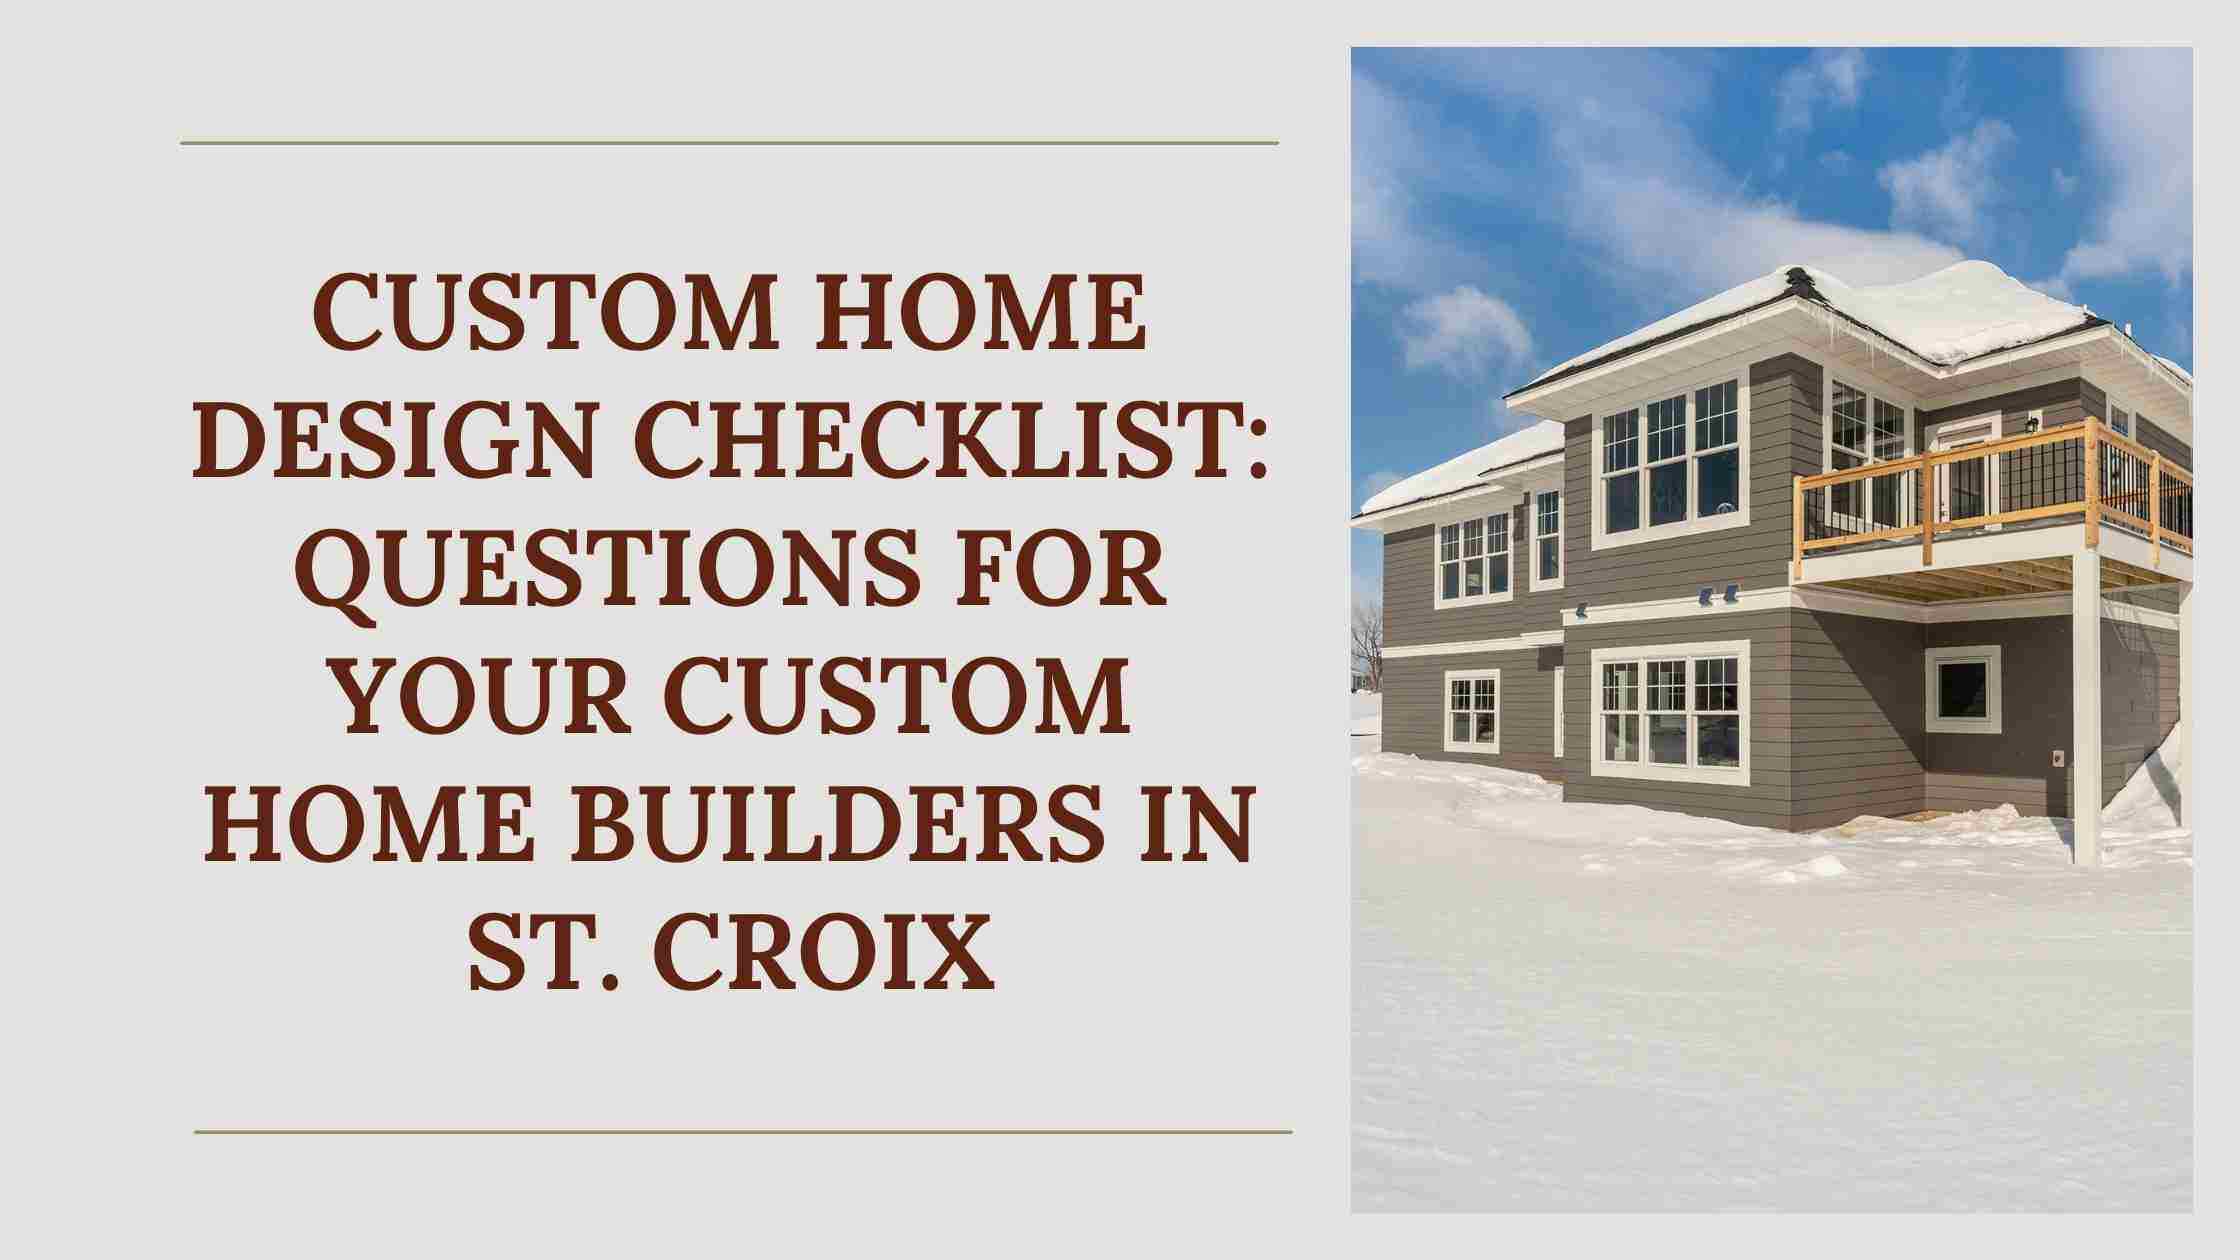 Custom Home Design Checklist: Questions For Your Builders in St. Croix